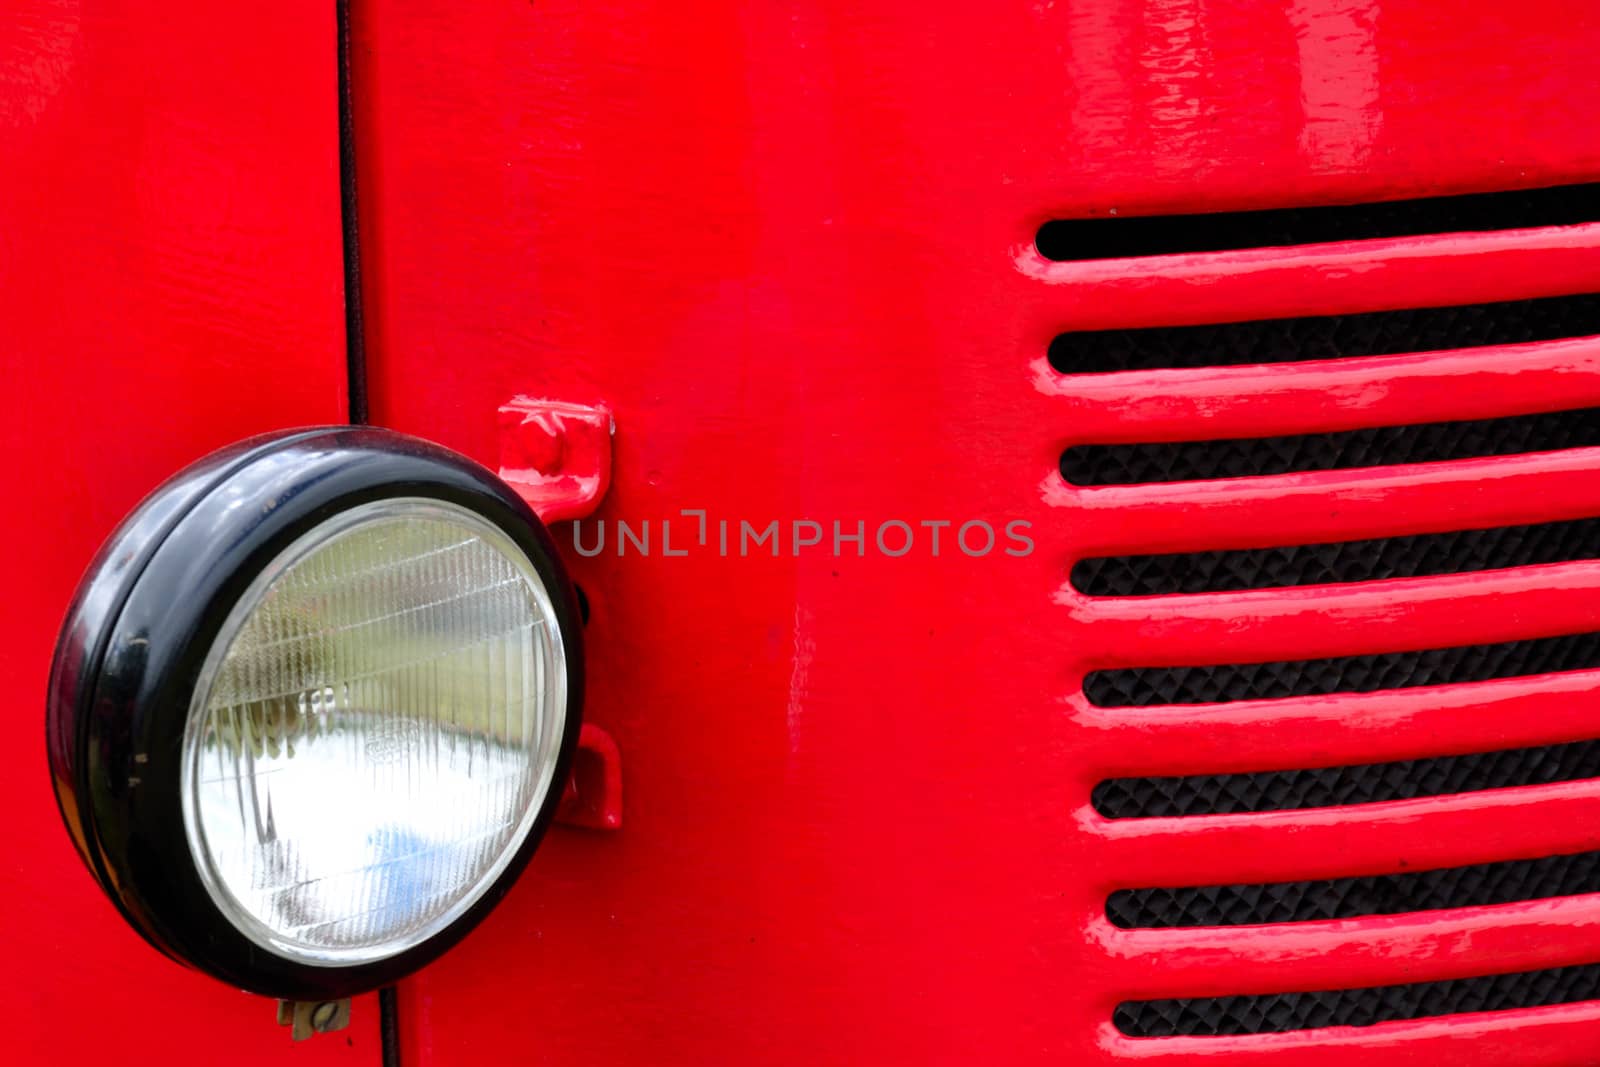 headlight and grill detail of red vehicle